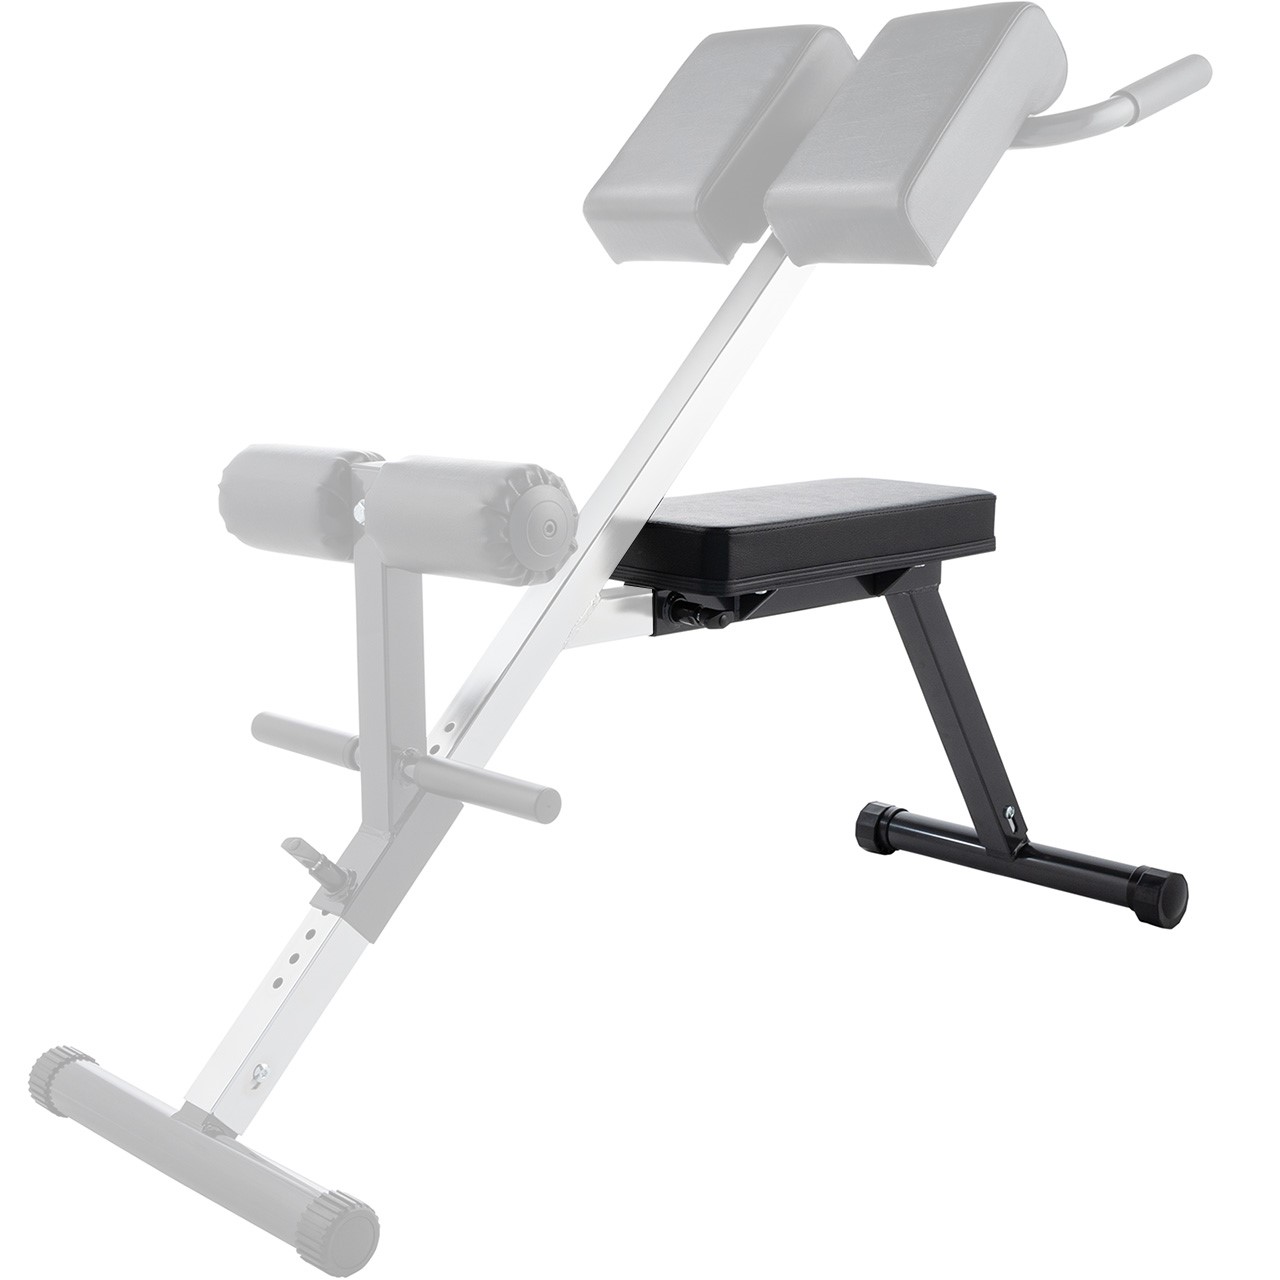 Ironmaster Cable Lat Tower Seat